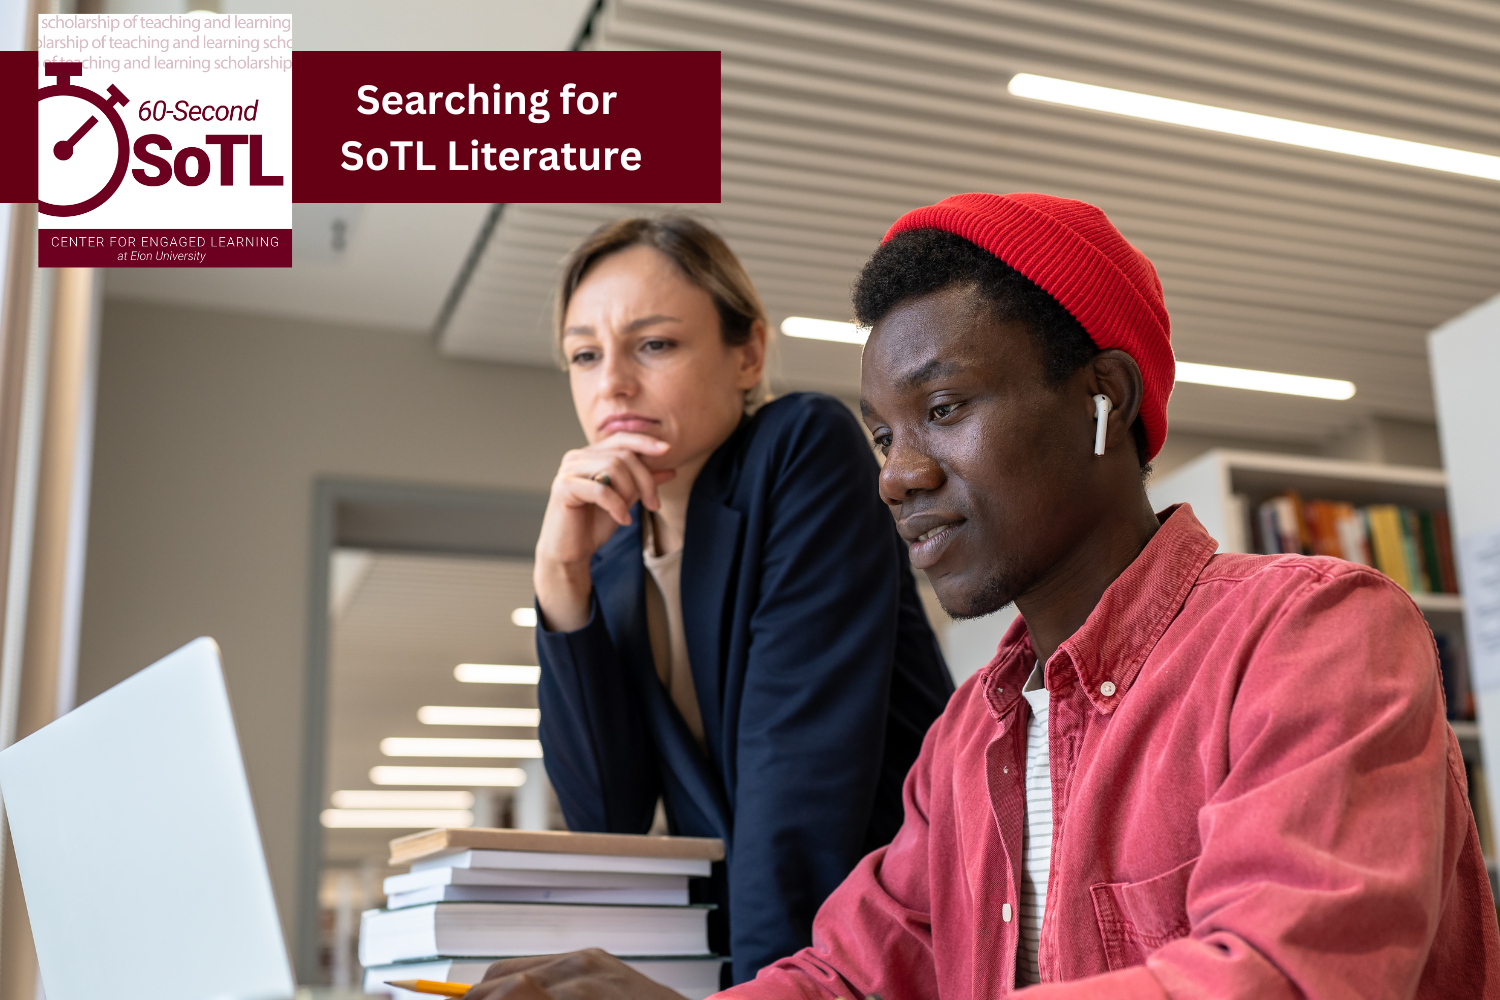 Two people working in a library. One is working on a computer, while also holding a pencil. The other is watching while leaning on a stack of books. An overlay reads, "60-Second SoTL. Searching for SoTL literature."